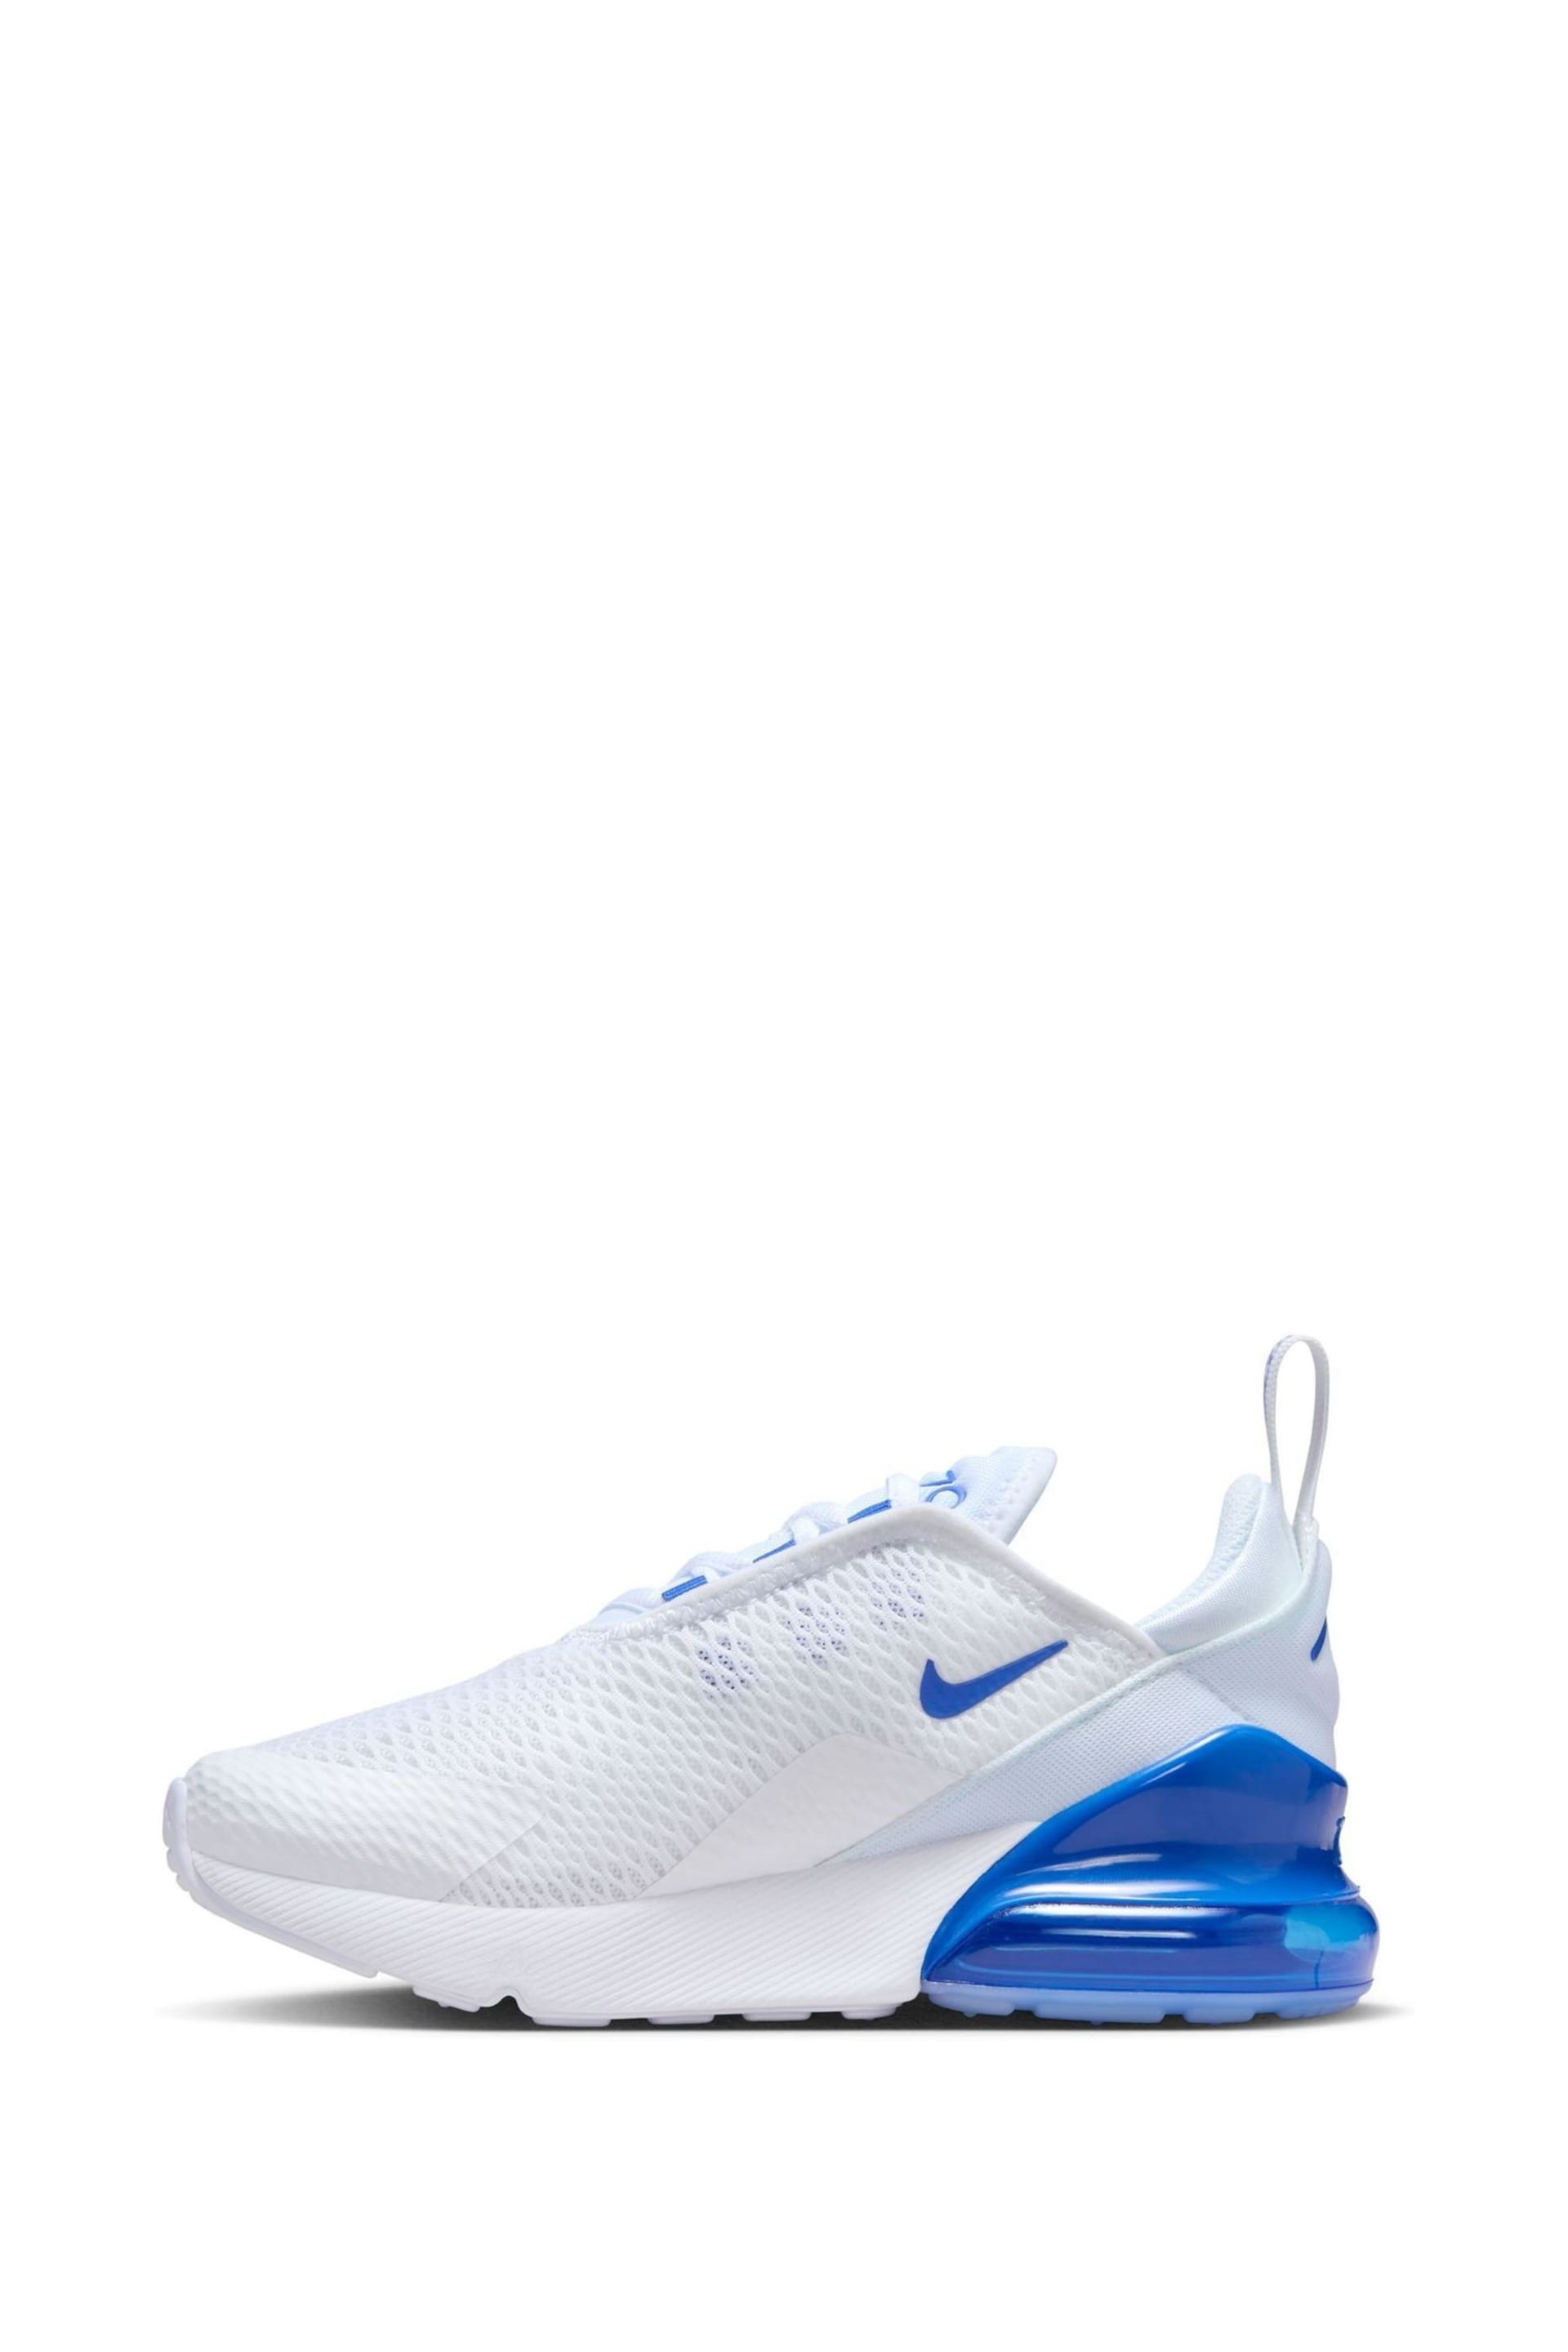 Nike White/Royal Blue Air Max 270 Junior Trainers - Image 5 of 10